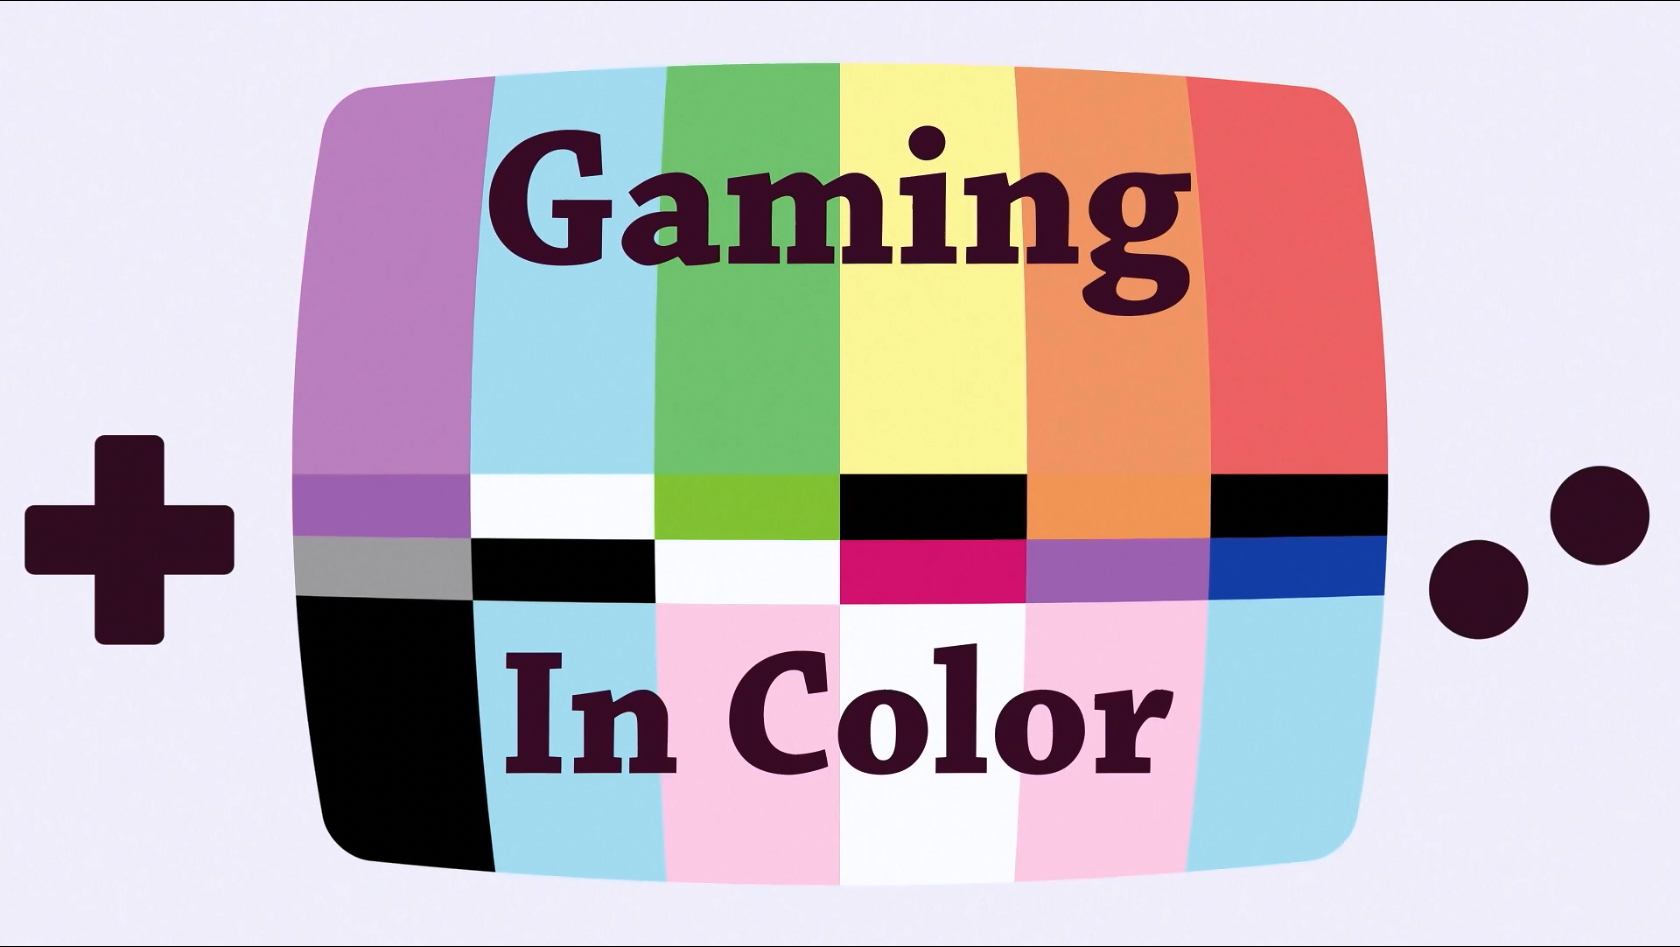 Gaming in Color